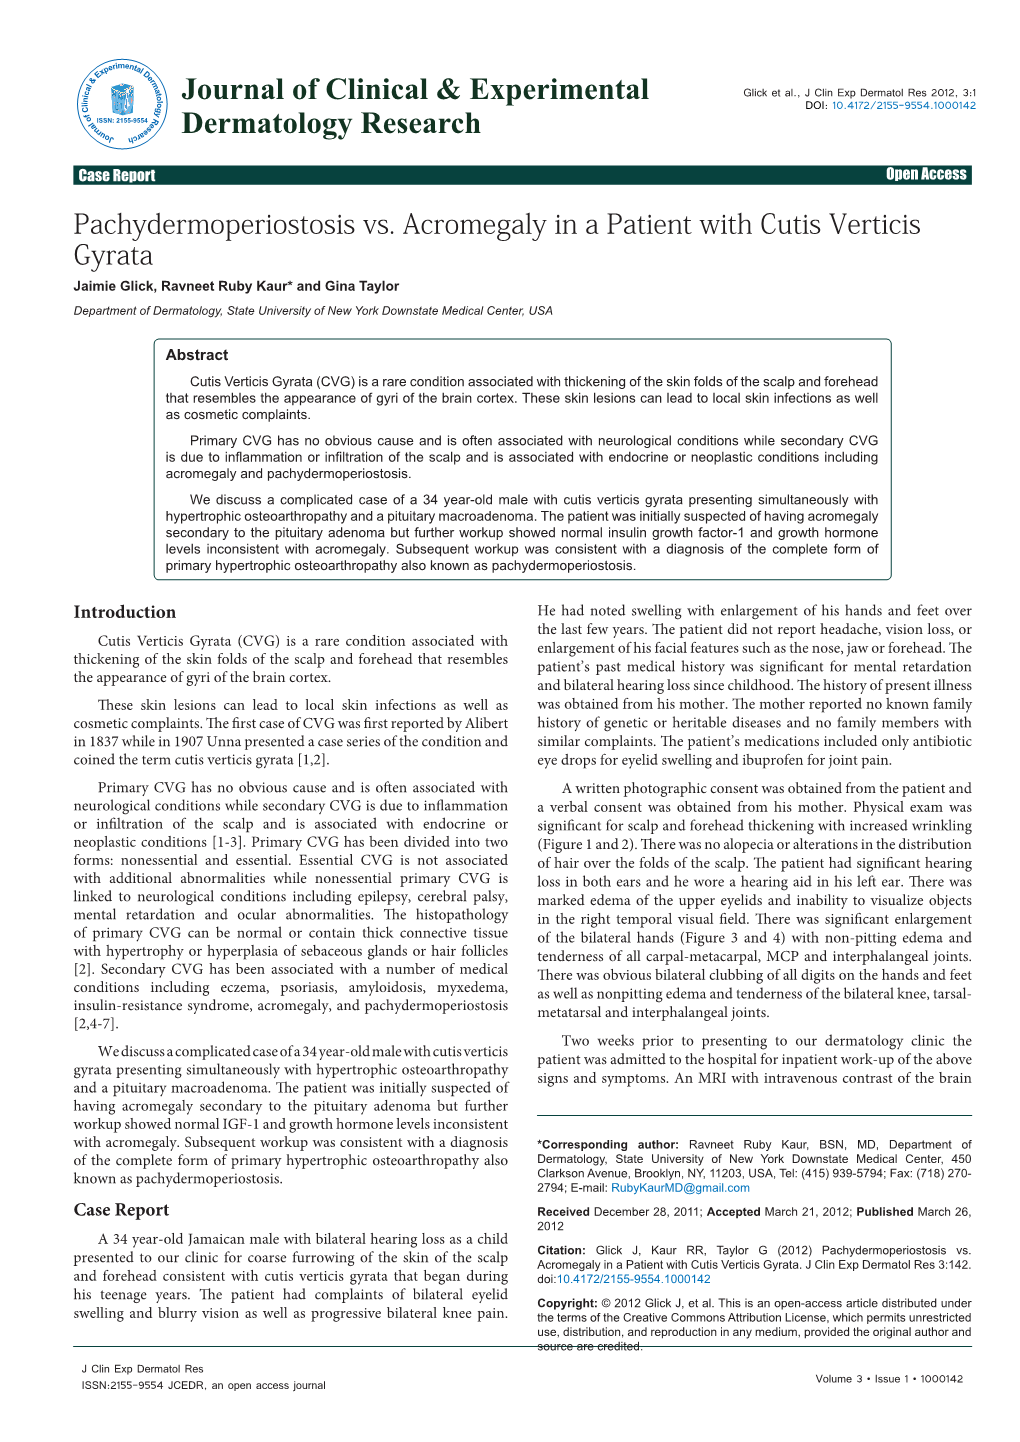 Pachydermoperiostosis Vs. Acromegaly in a Patient with Cutis